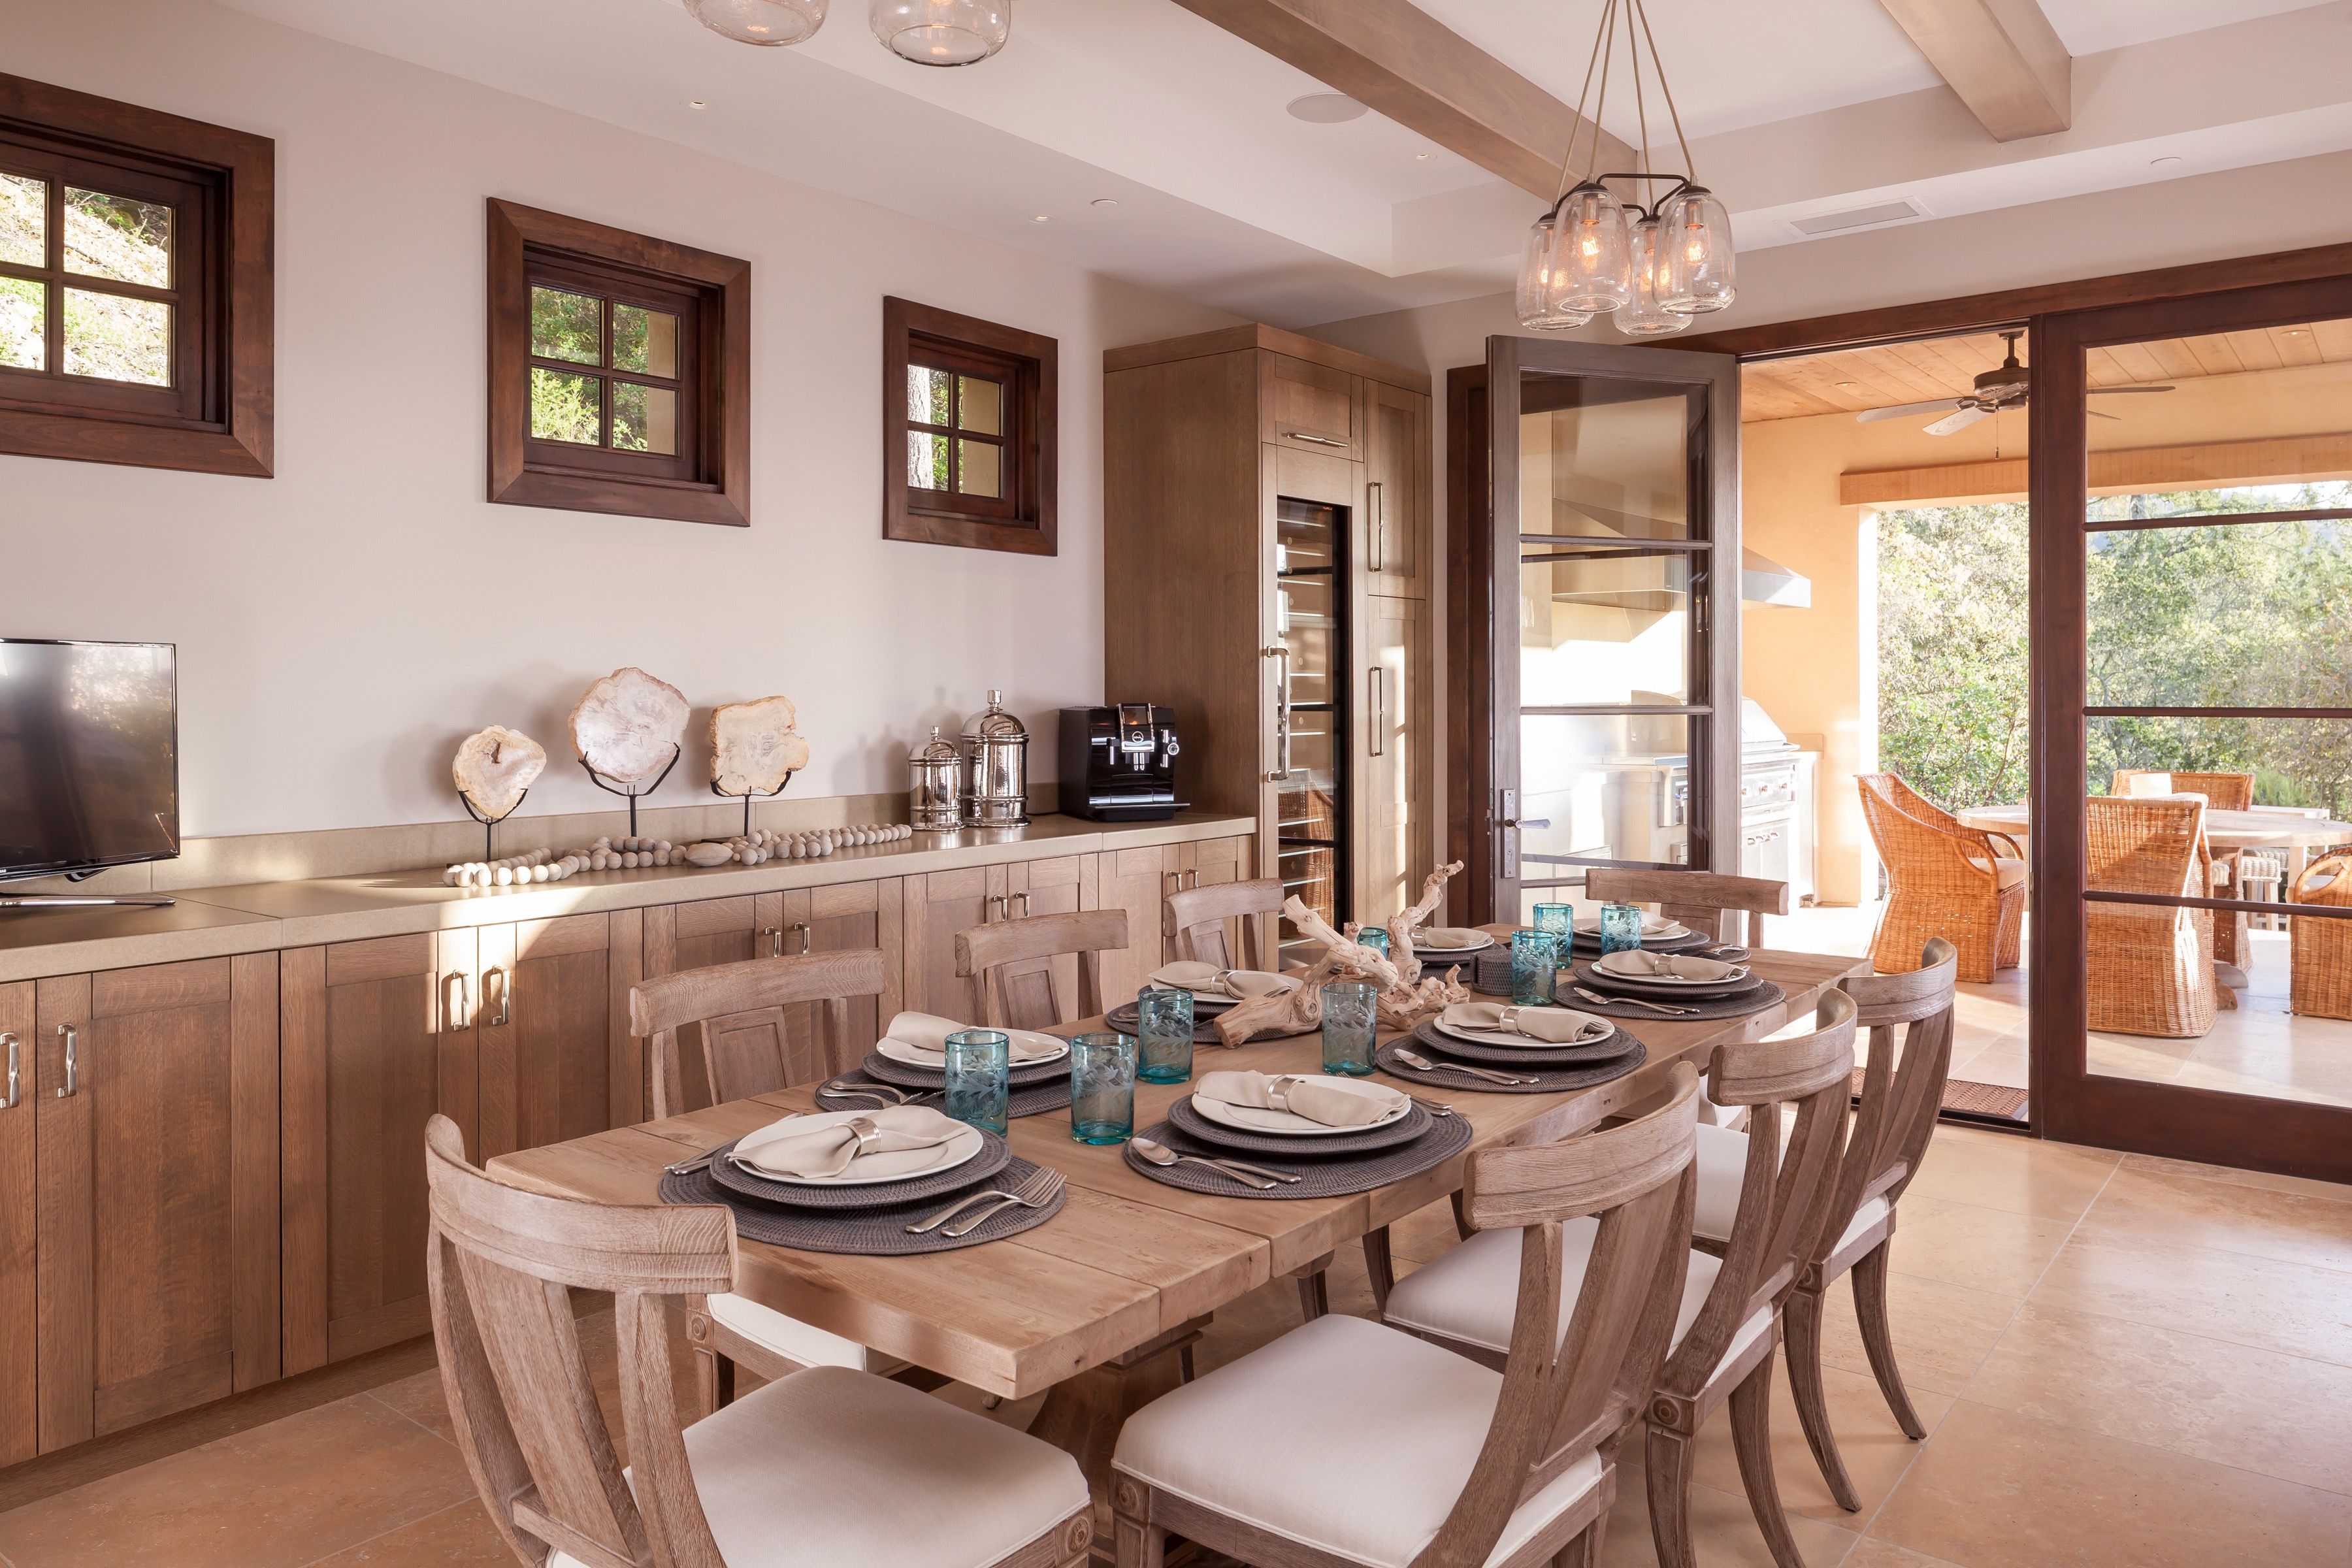 Ethnic Influences In Modern Dining Room Decor With Wood Furniture (View 11 of 15)